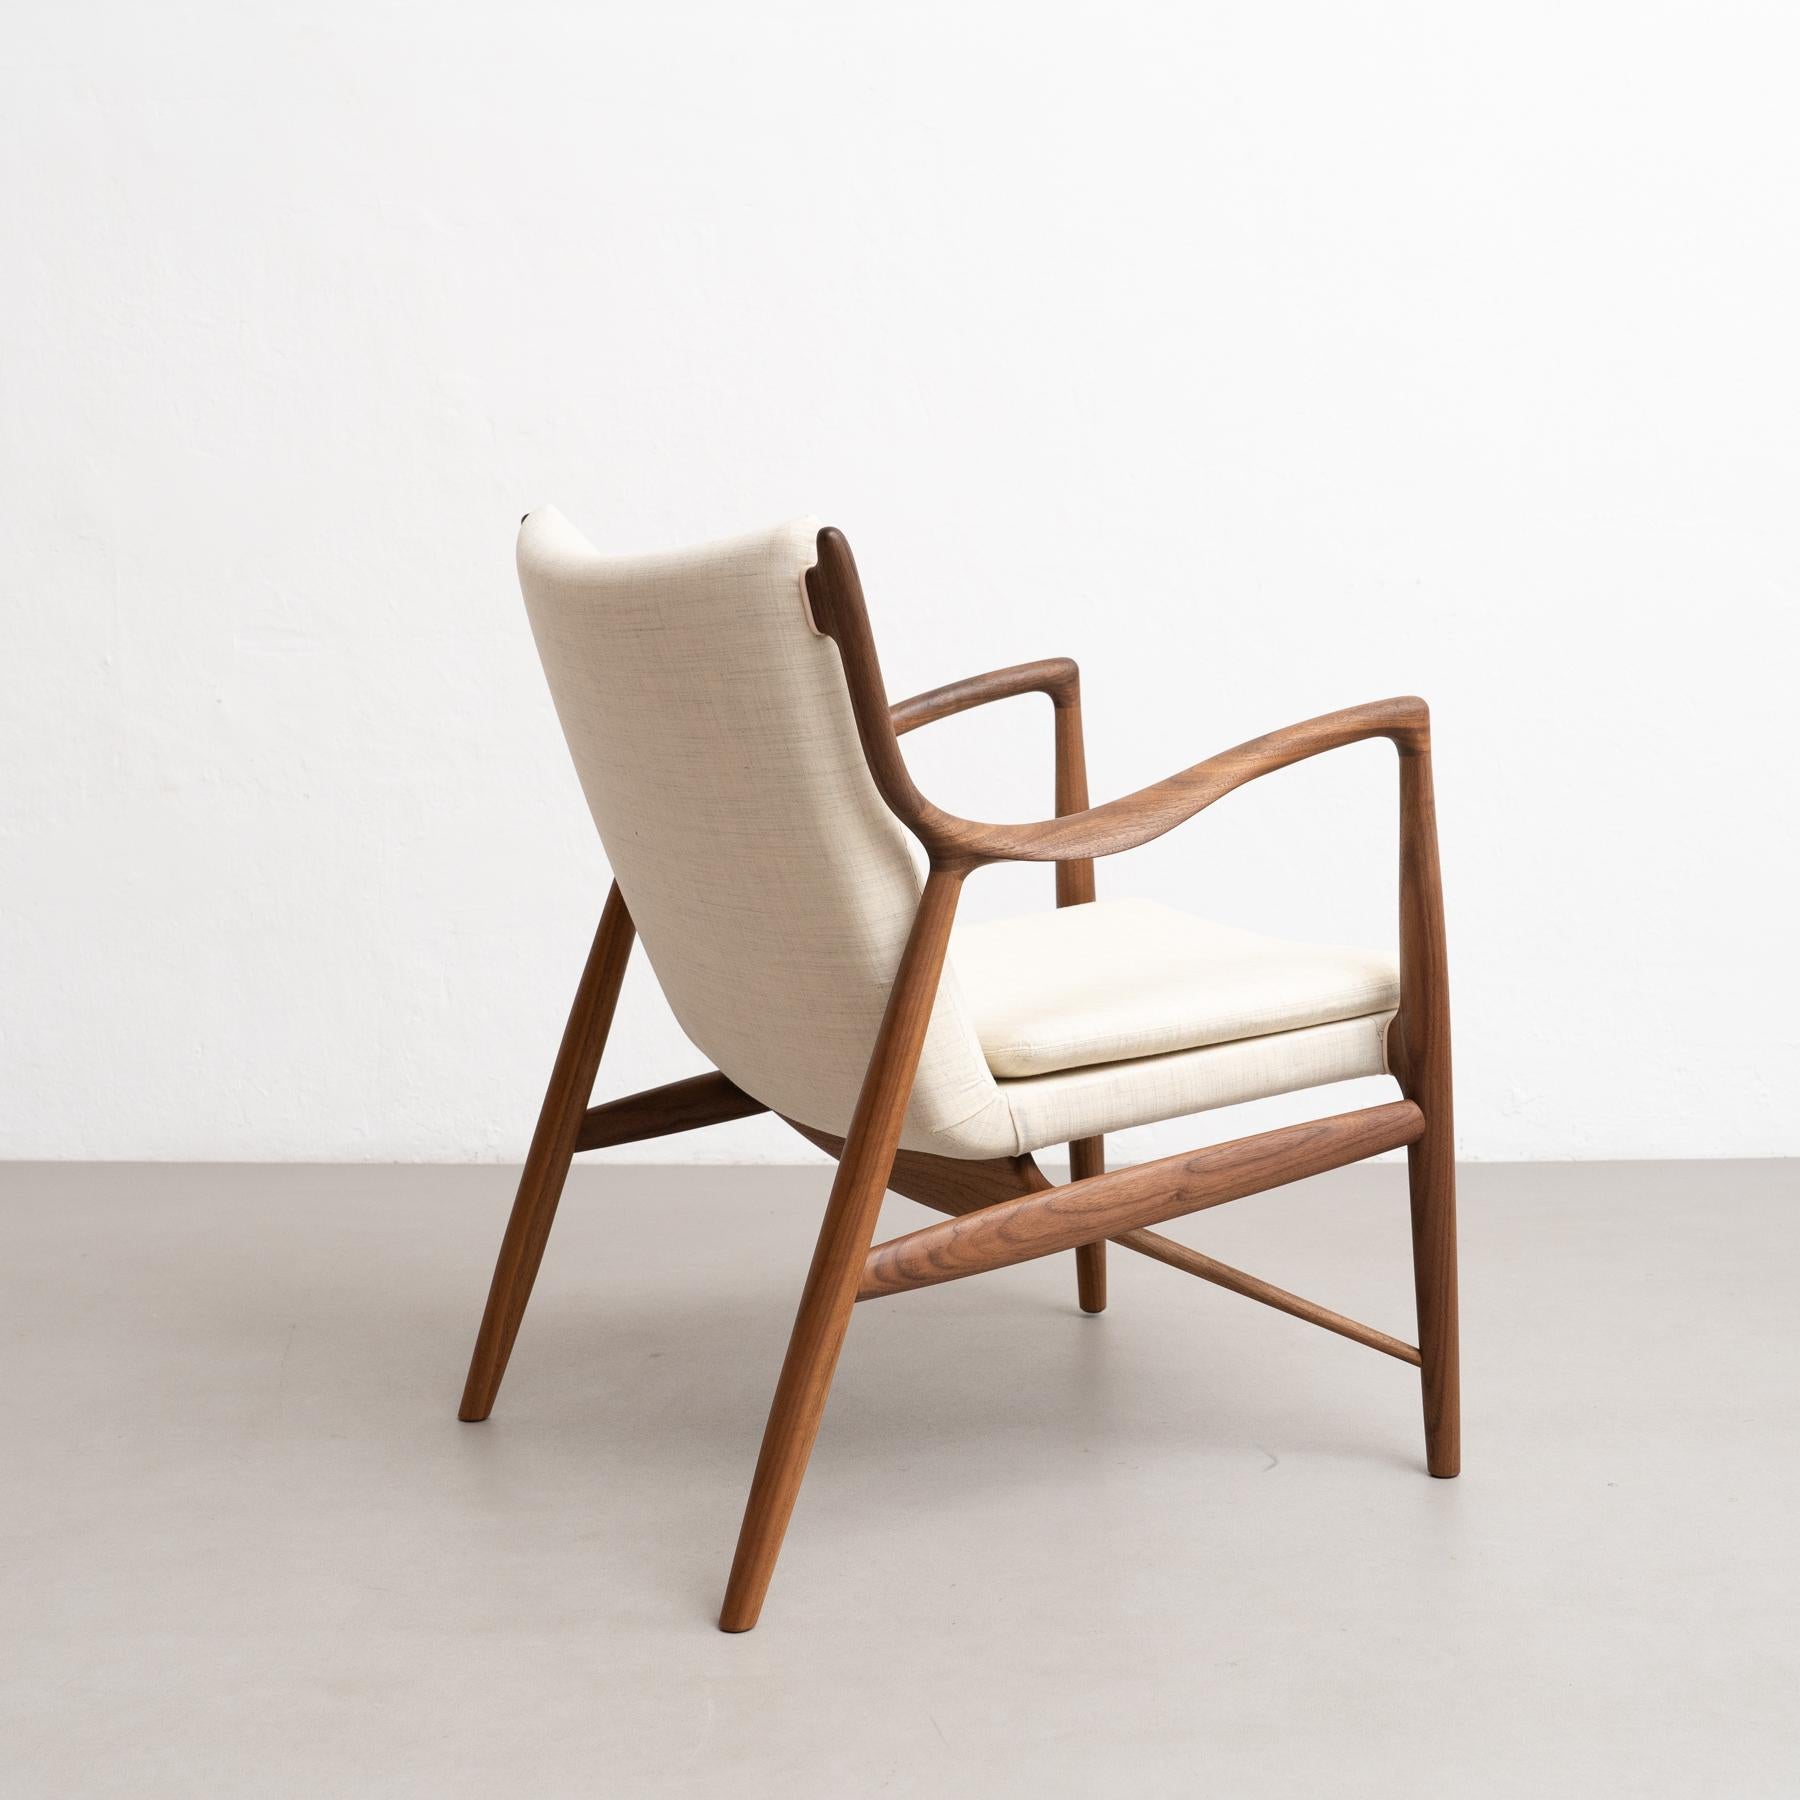 Finn Juhl 45 Chair, Wood and Fabric In New Condition For Sale In Barcelona, Barcelona